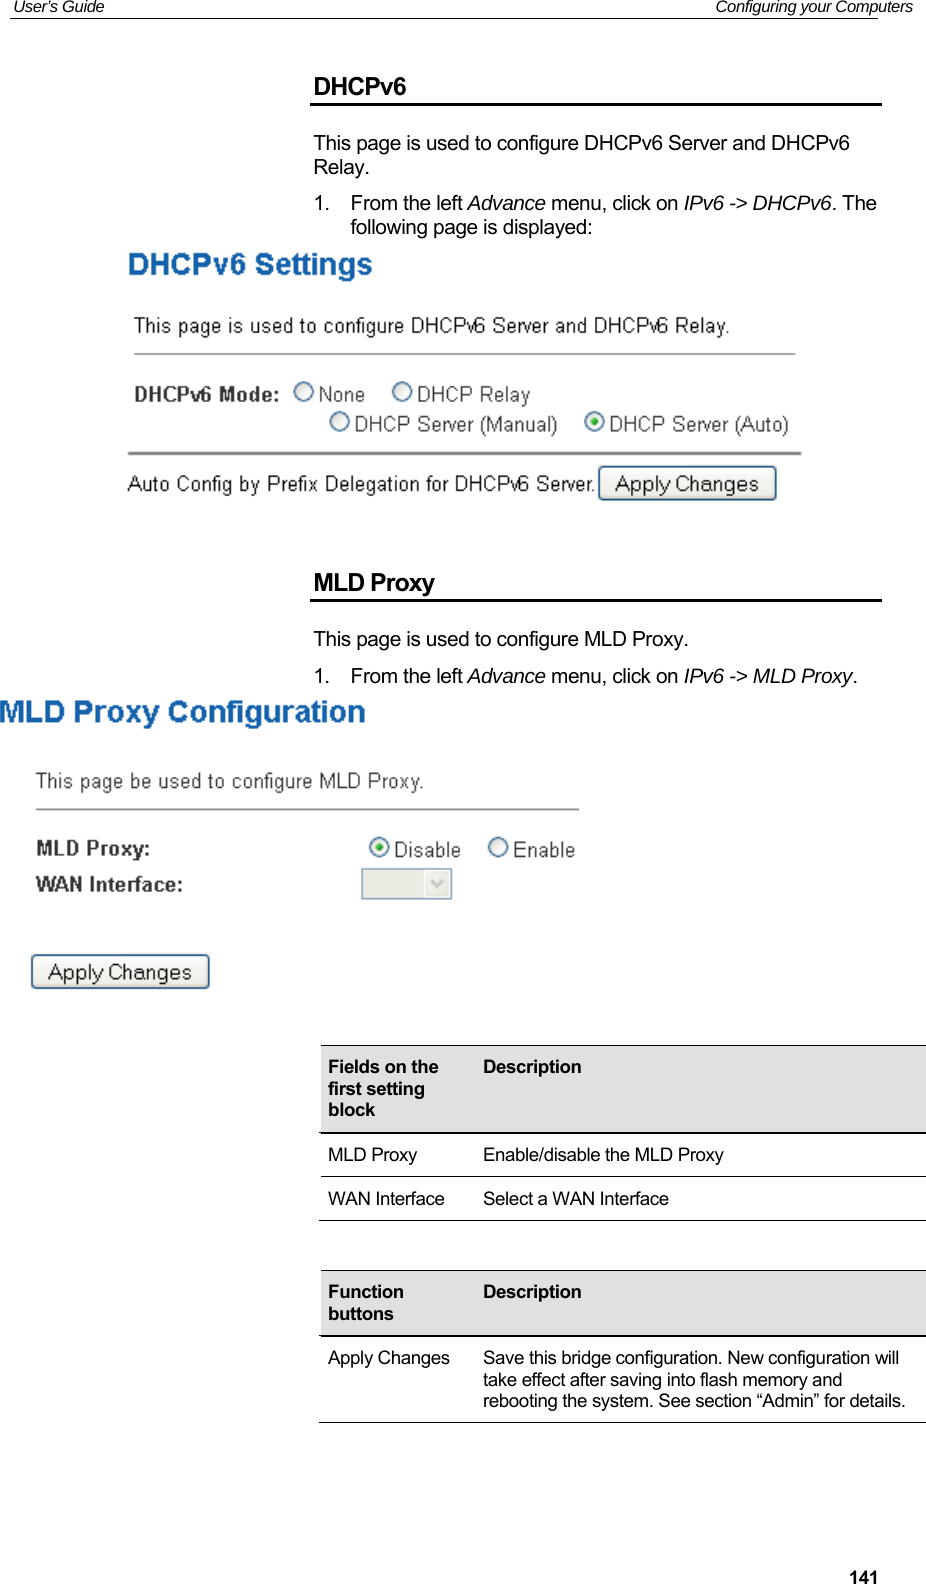 User’s Guide   Configuring your Computers  141DHCPv6 This page is used to configure DHCPv6 Server and DHCPv6 Relay.   1.  From the left Advance menu, click on IPv6 -&gt; DHCPv6. The following page is displayed:   MLD Proxy This page is used to configure MLD Proxy.   1.  From the left Advance menu, click on IPv6 -&gt; MLD Proxy.                 Fields on the first setting block Description MLD Proxy  Enable/disable the MLD Proxy WAN Interface  Select a WAN Interface Function buttons Description Apply Changes  Save this bridge configuration. New configuration will take effect after saving into flash memory and rebooting the system. See section “Admin” for details. 